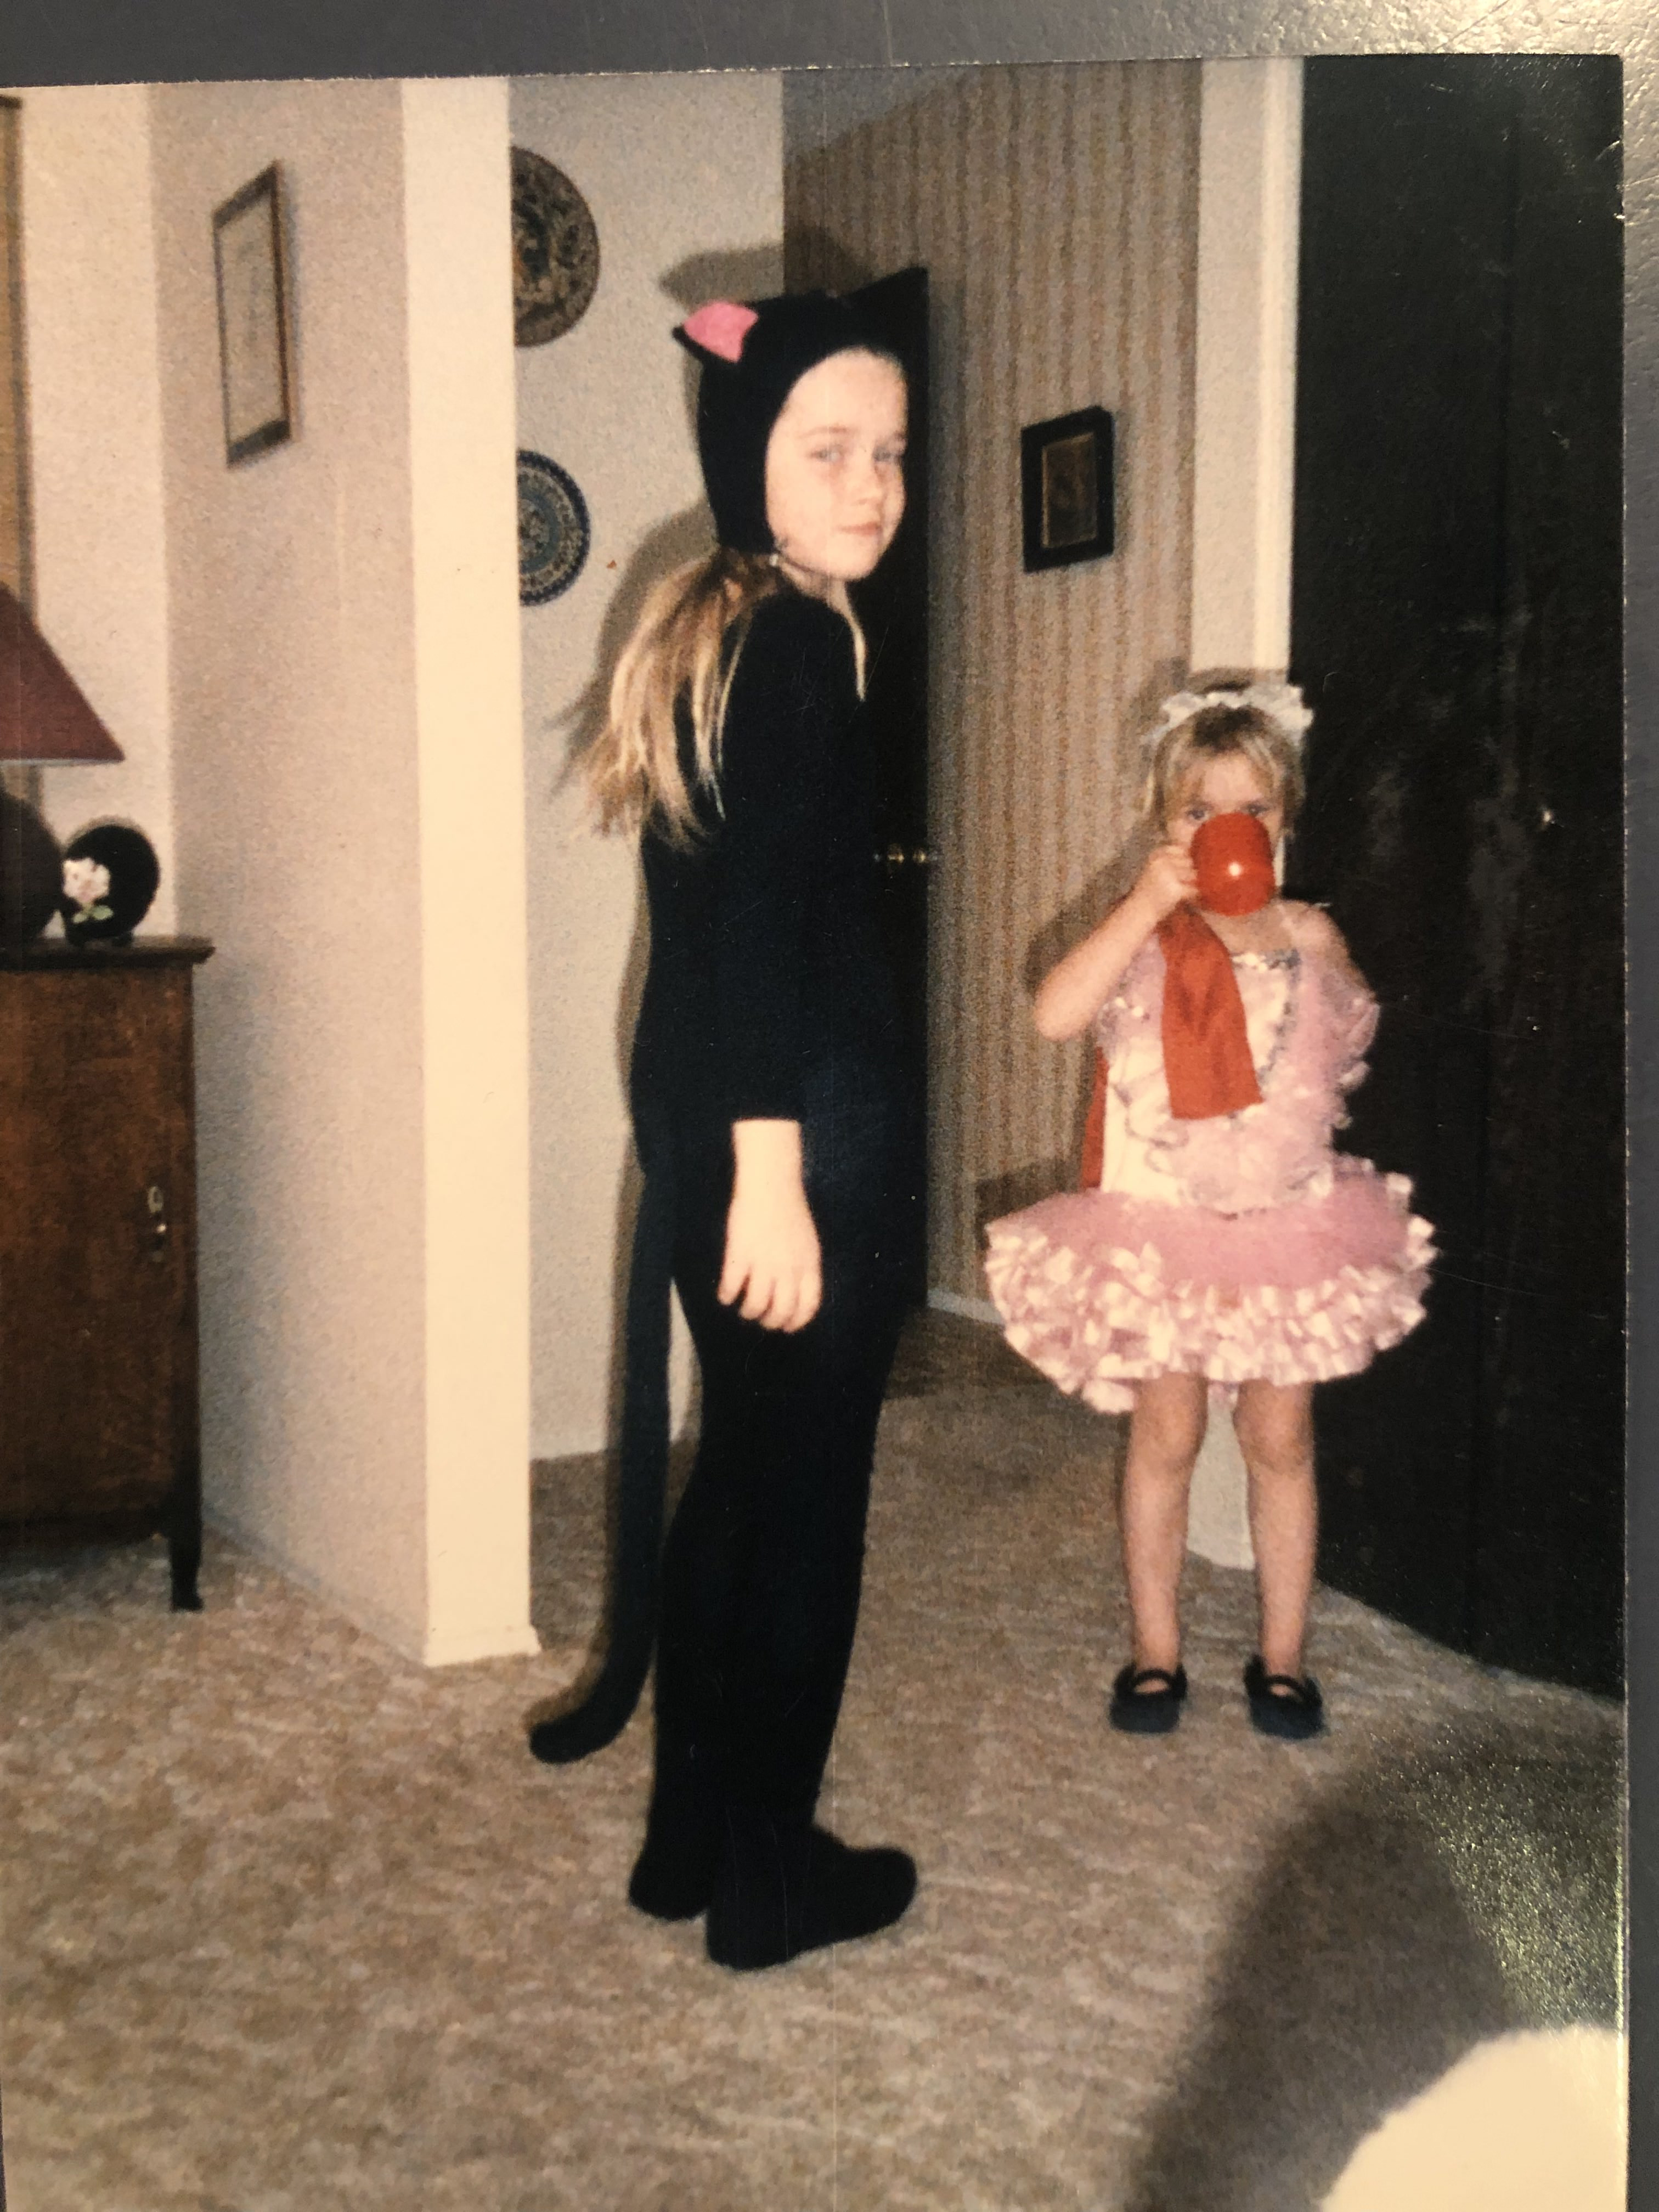 Young blond white girl dressed in a black cat costume stands in living room beside even smaller girl in a pink tutu.